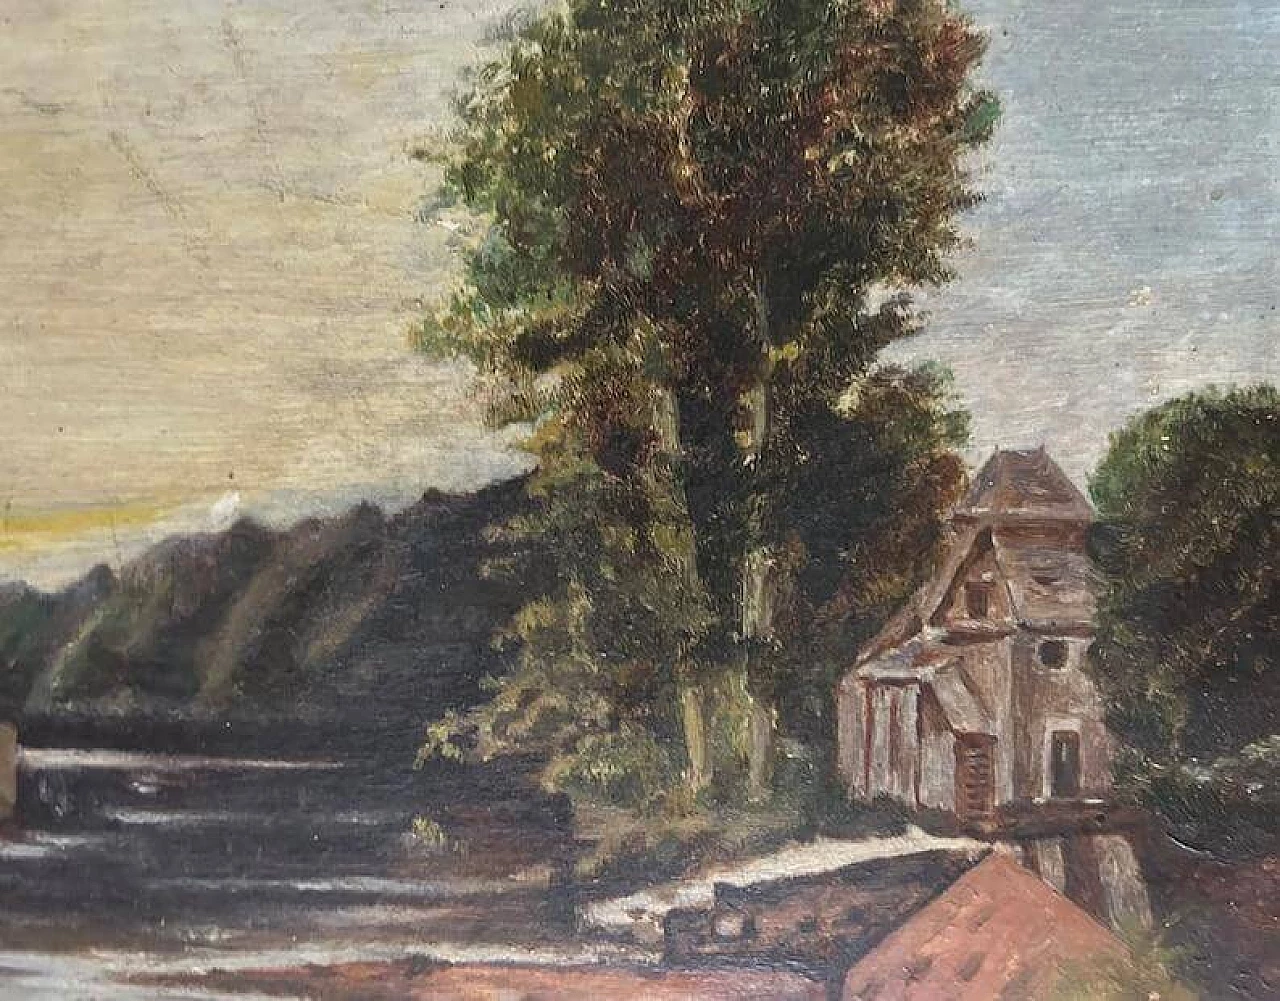 Lake landscape in the style of the Barbizon School, painting, 1920s 5